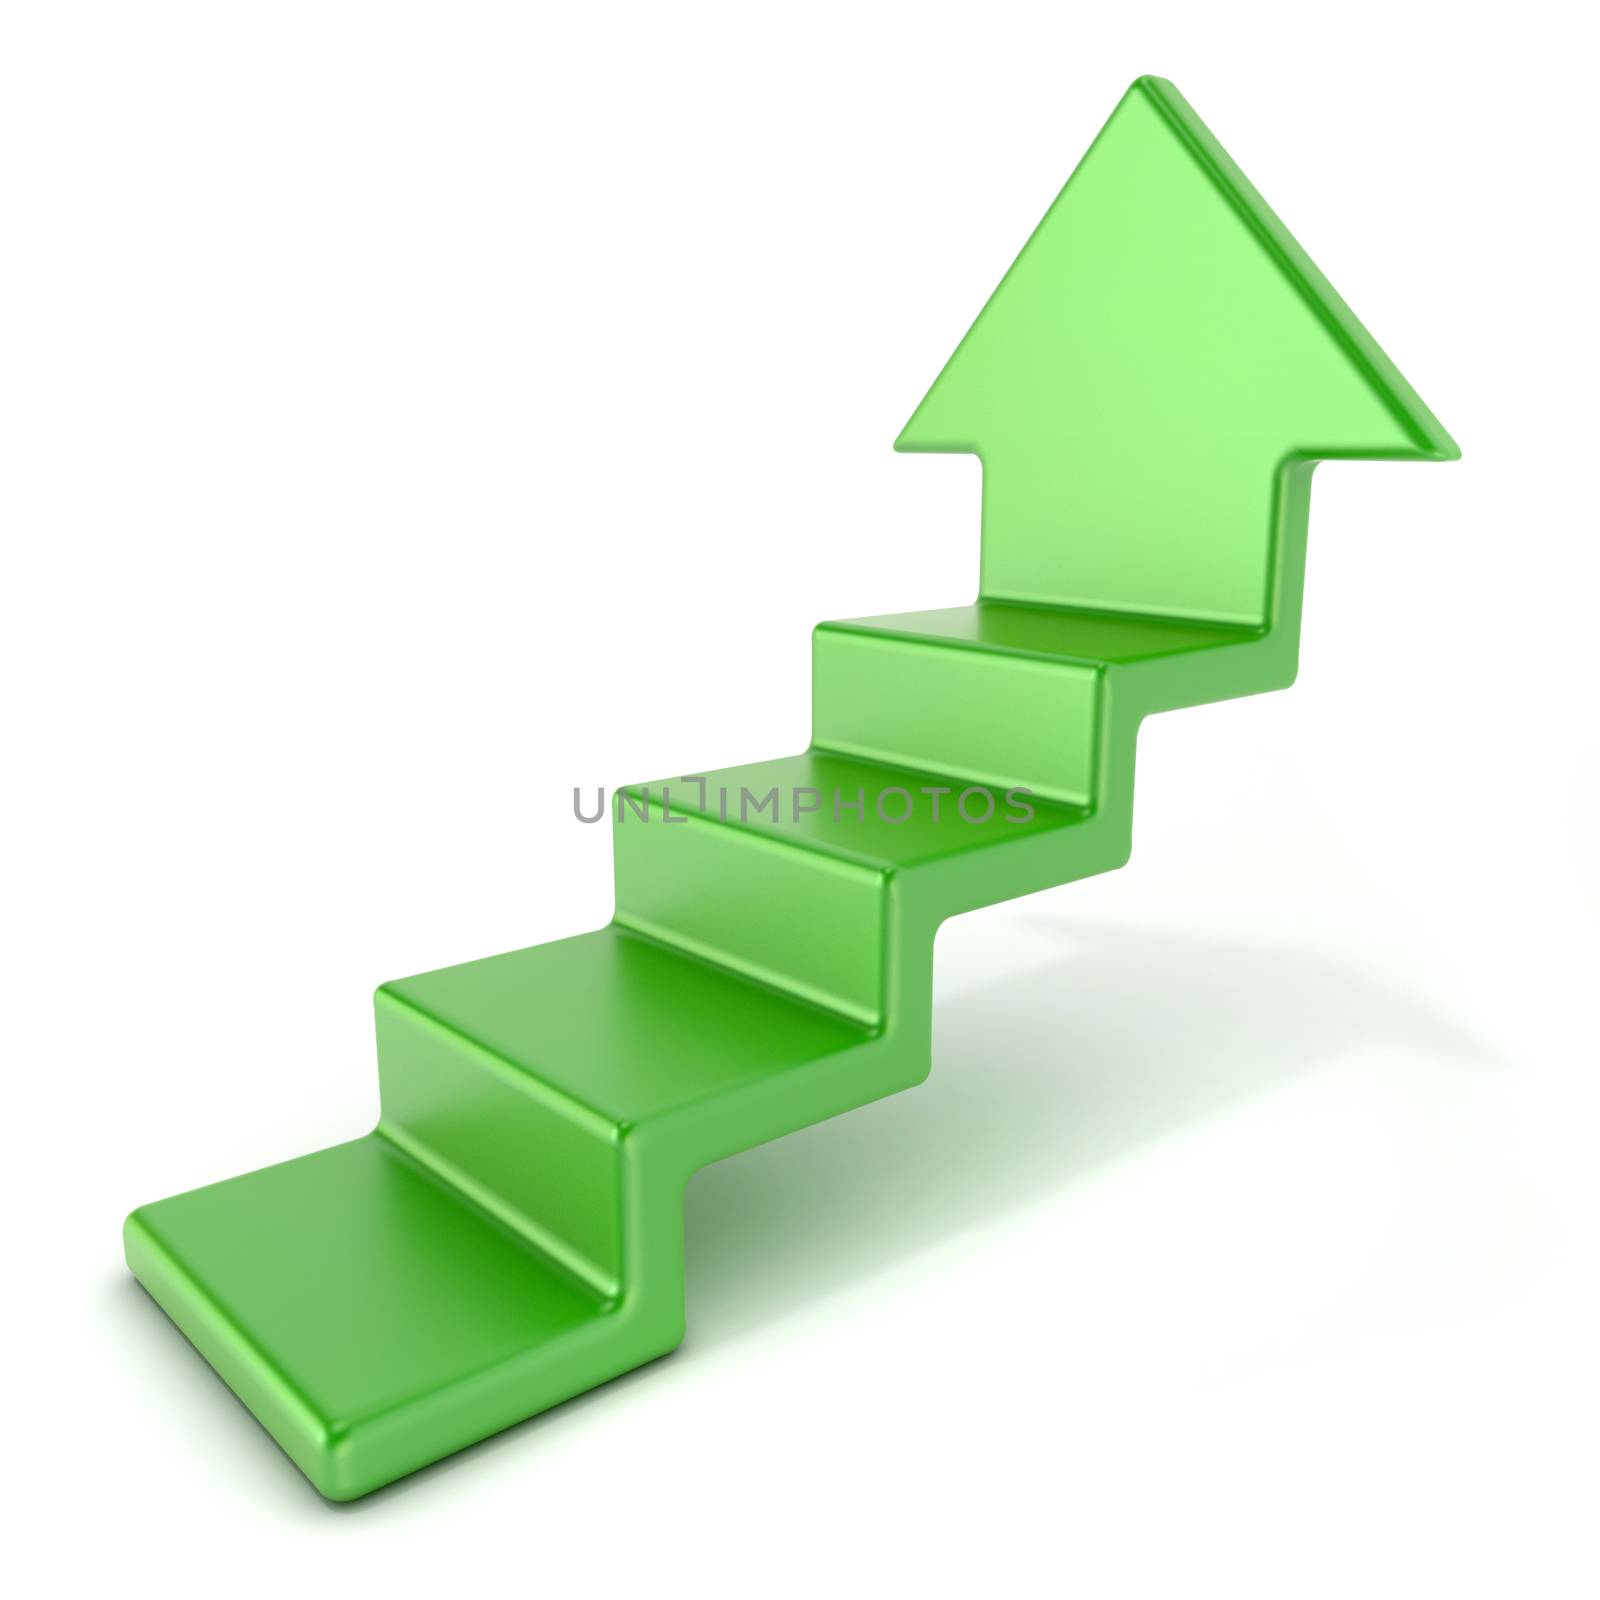 Green up arrow stairs. 3D render illustration isolated on white background